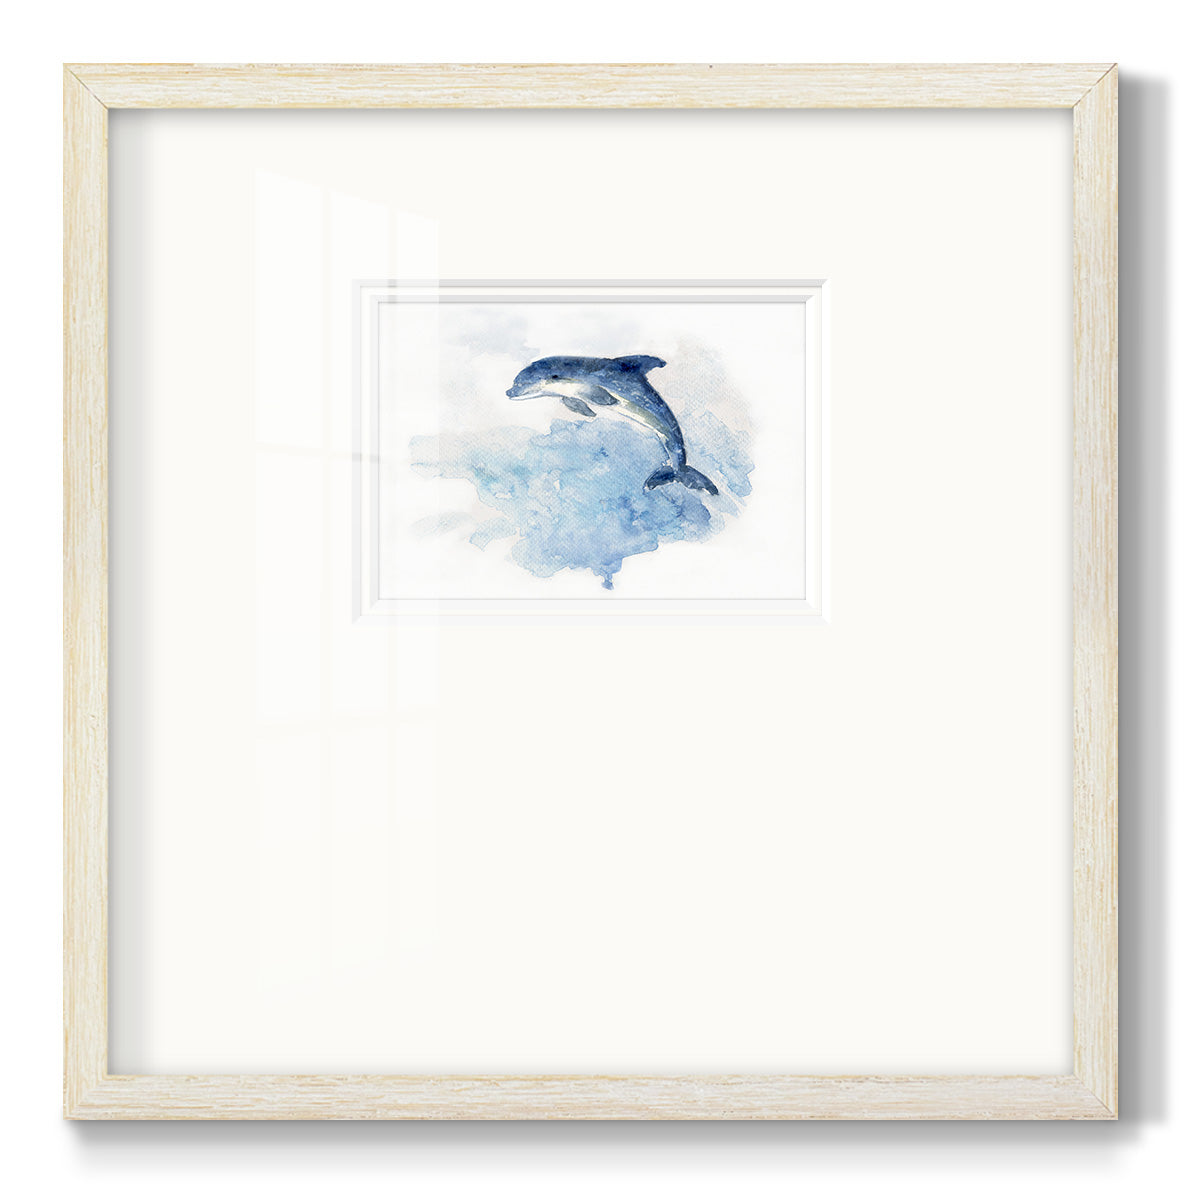 Wave Jumping Premium Framed Print Double Matboard